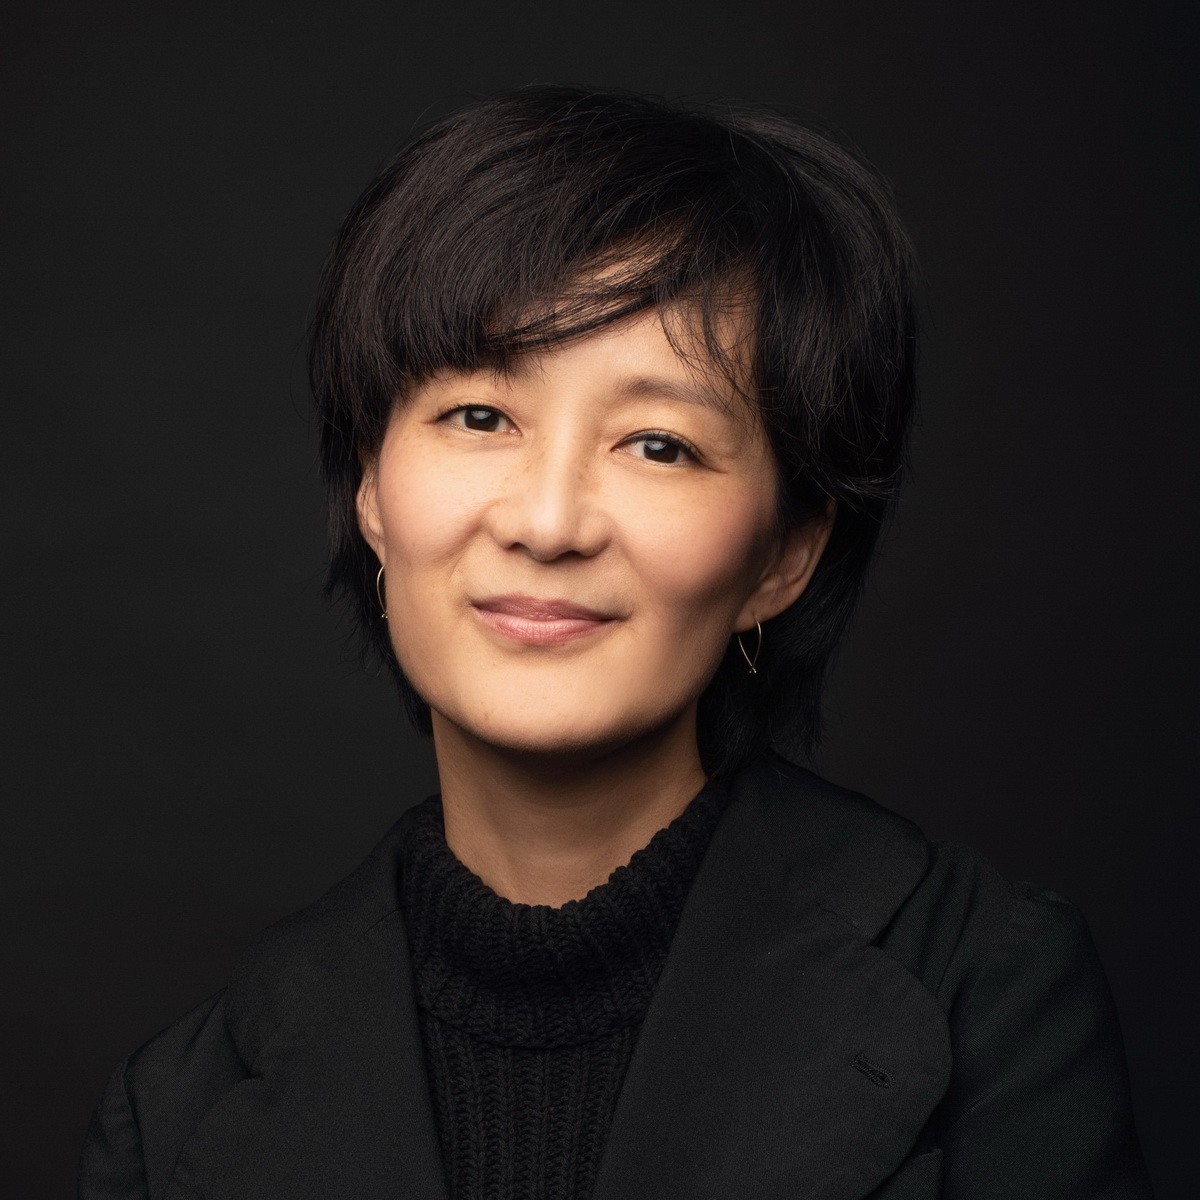 PATRICIA RHEE ELEVATED TO AIA COLLEGE OF FELLOWS